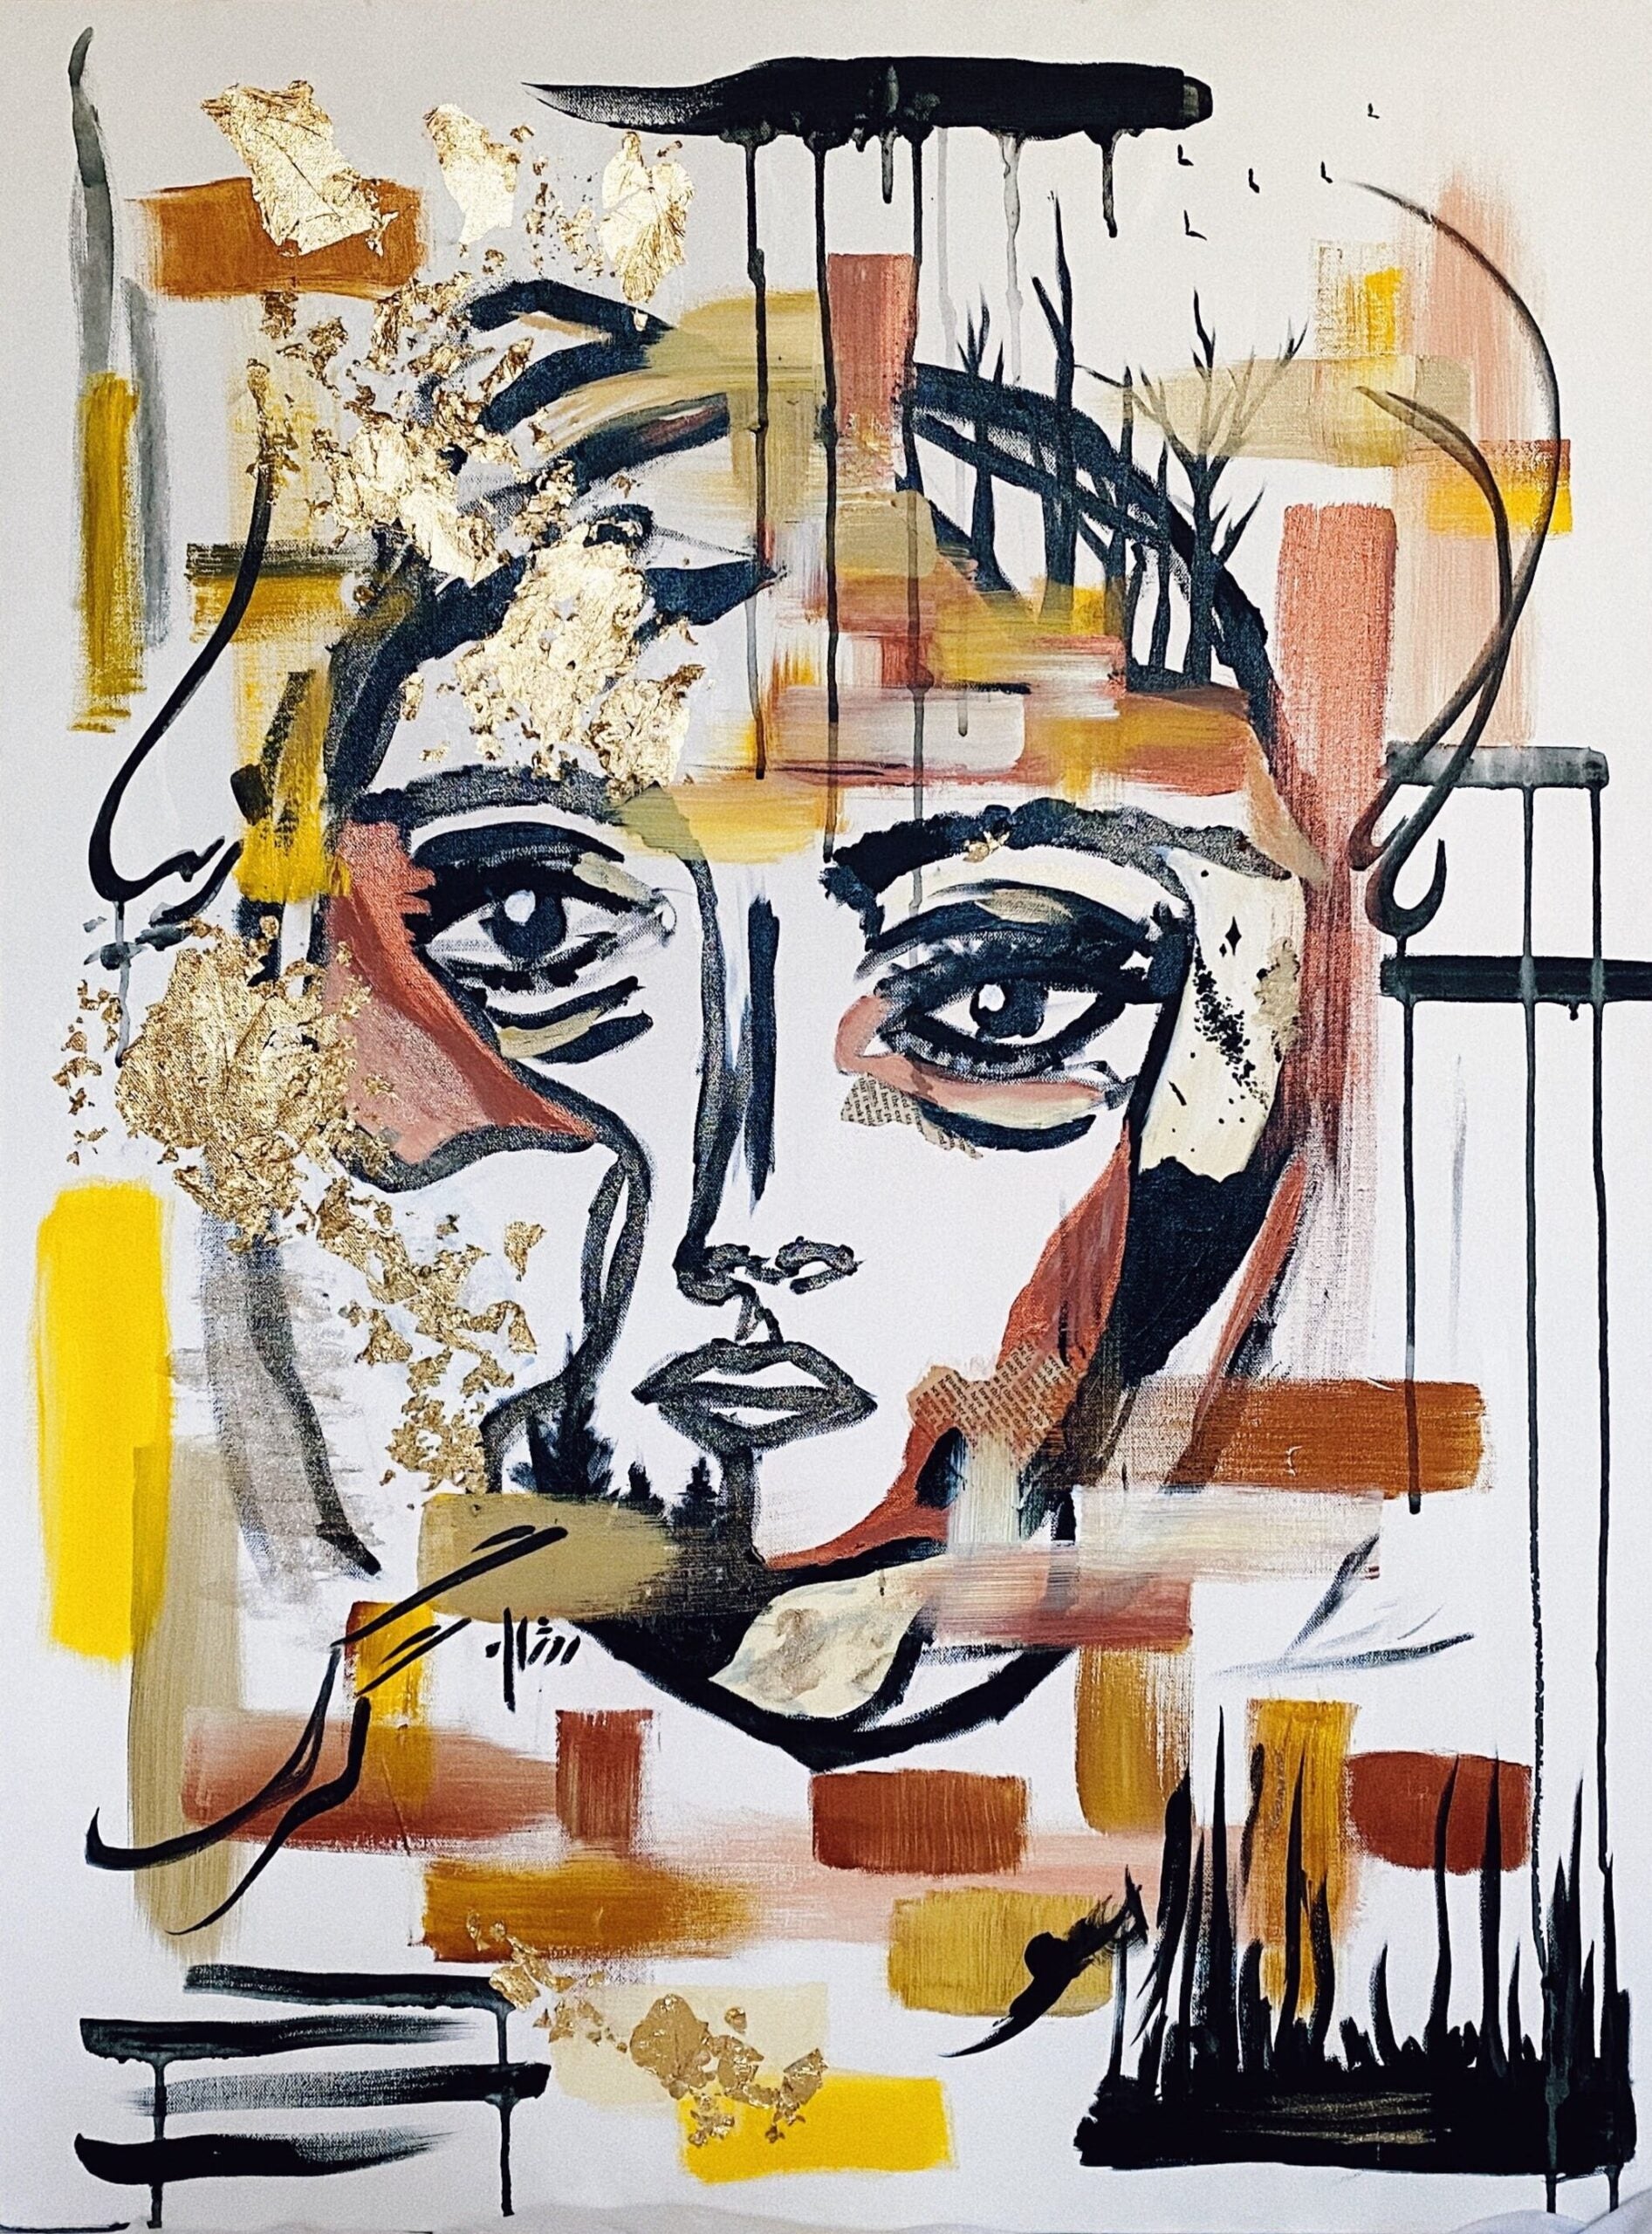 Abstract illustration of a woman's face among other decorative elements.